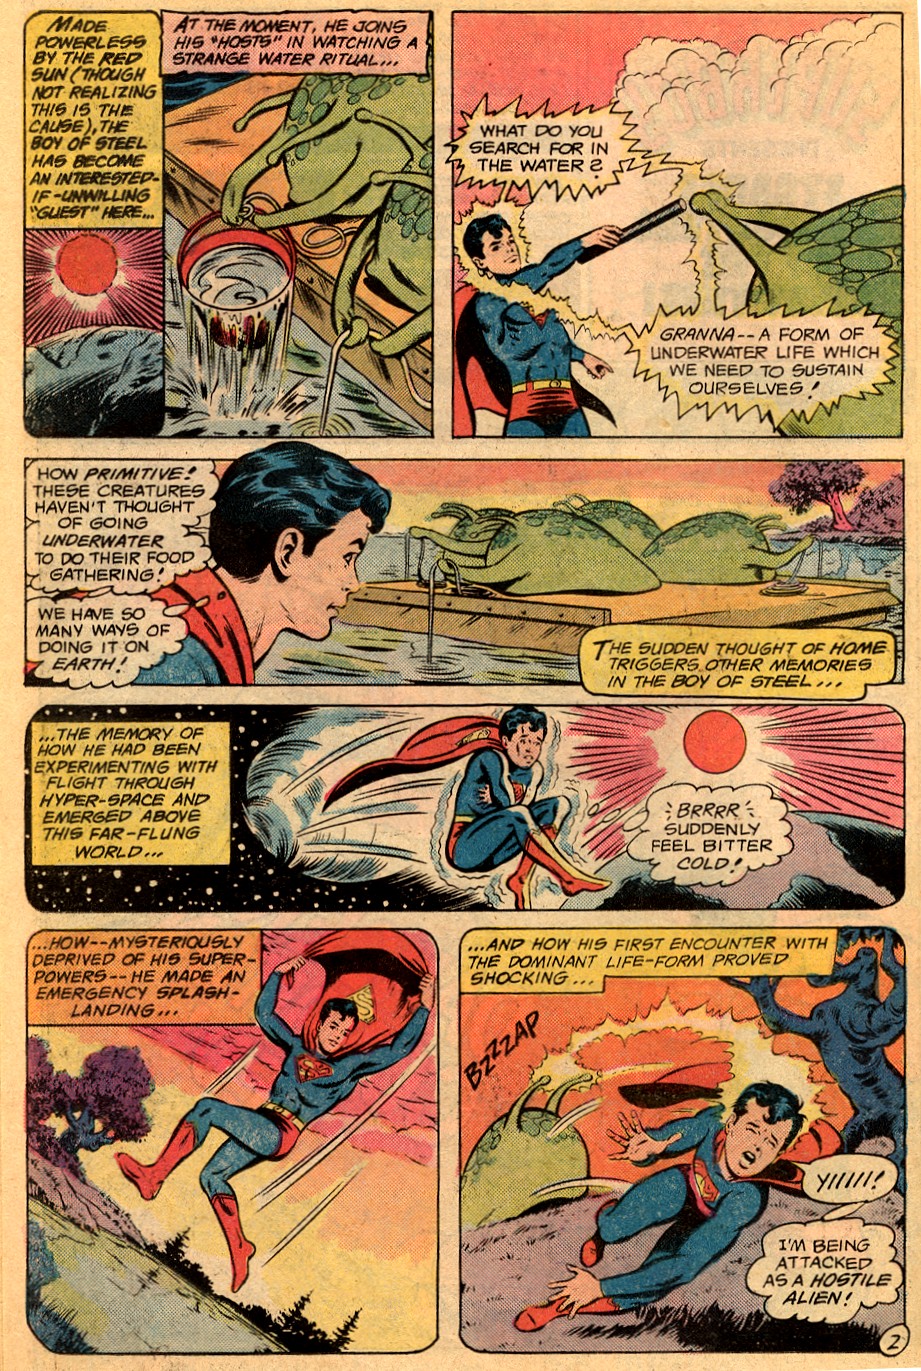 The New Adventures of Superboy 21 Page 25